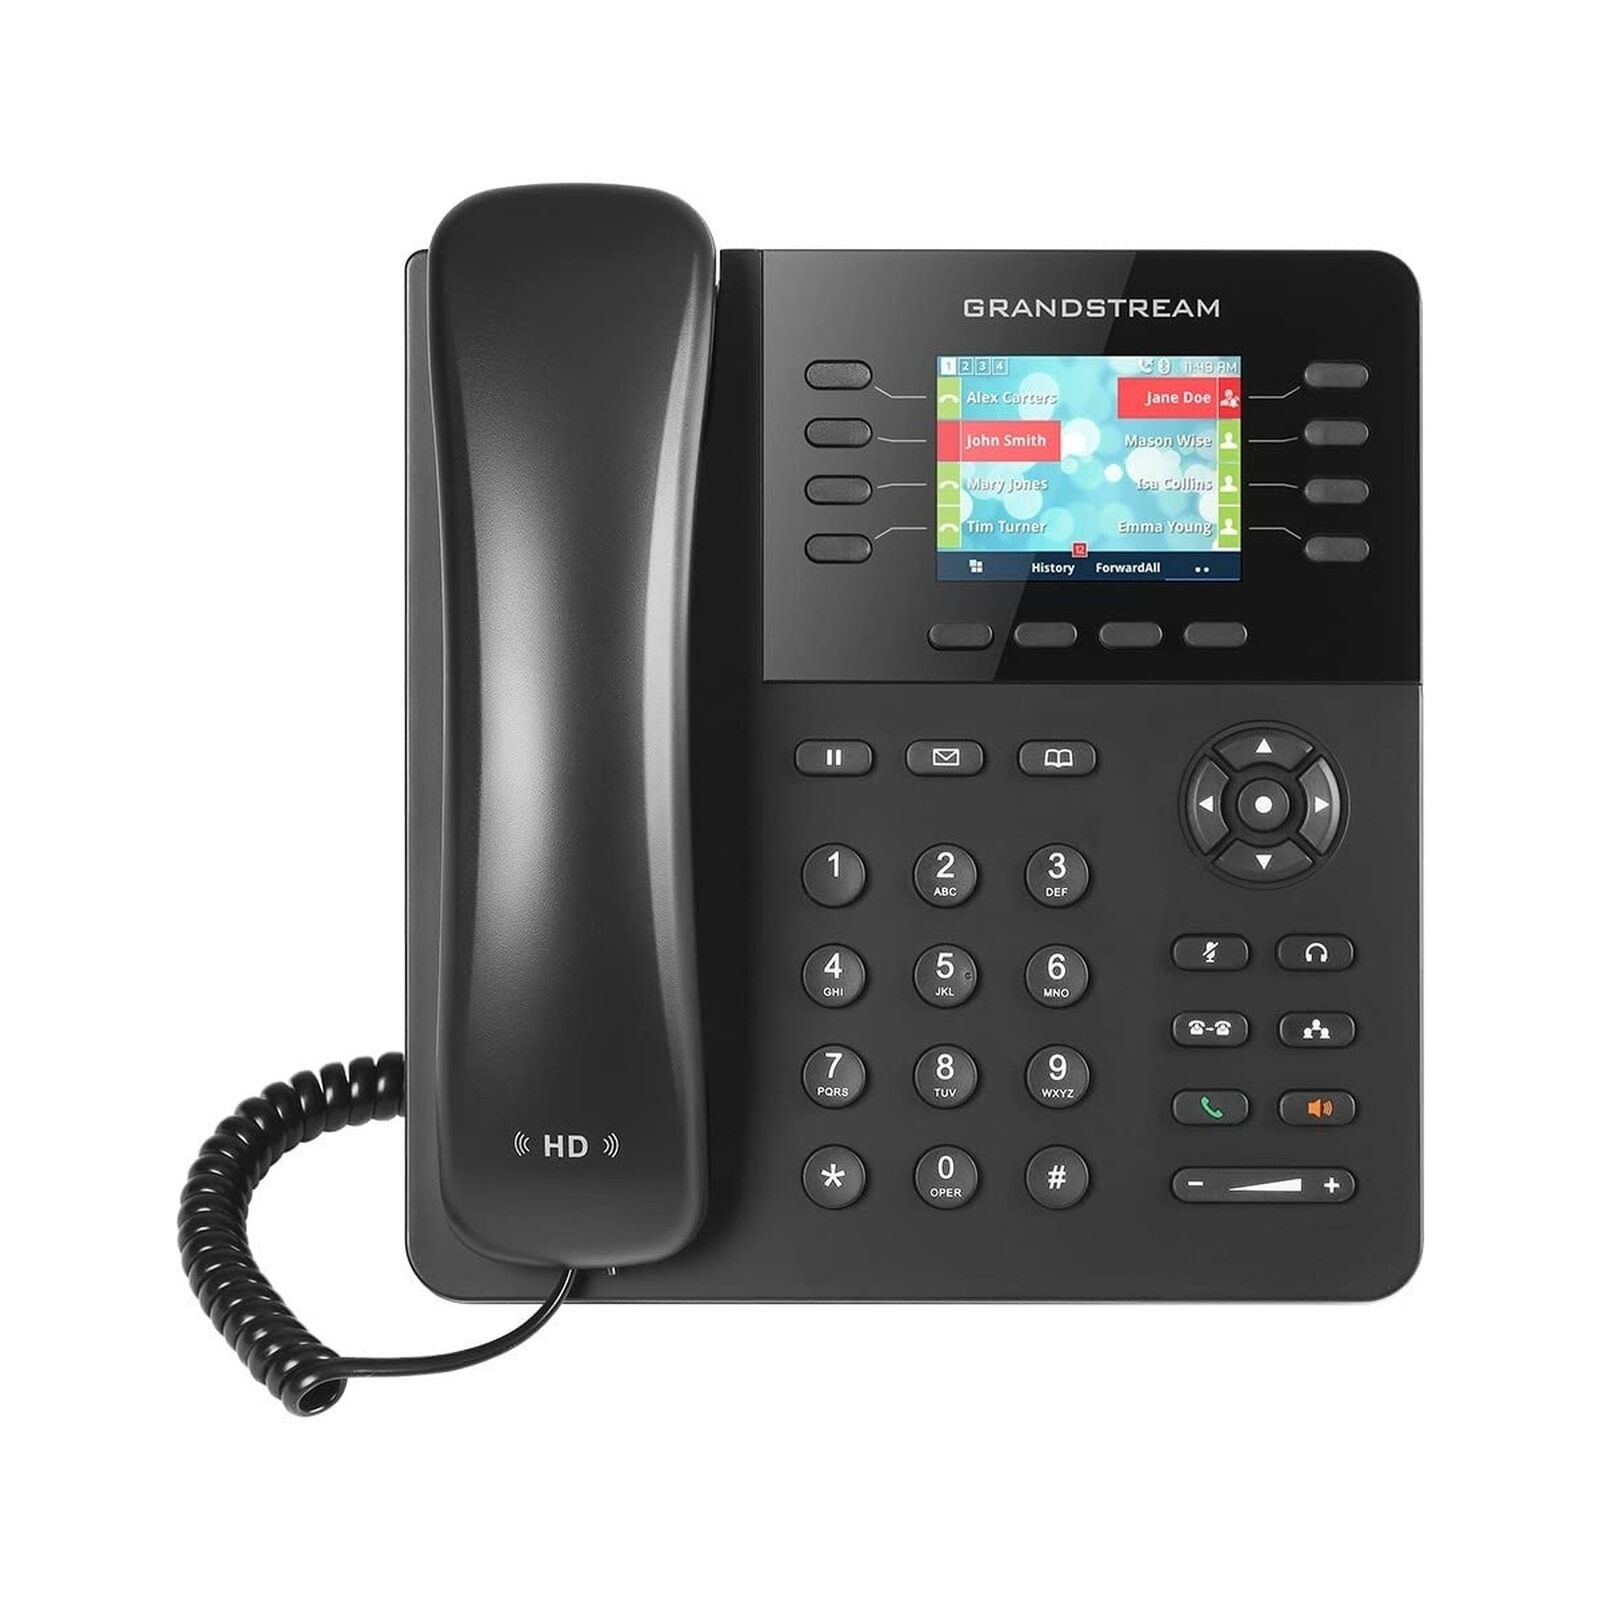 Grandstream GS-GXP2135 Enterprise IP Phone with Gigabit Speed & Supports up t...